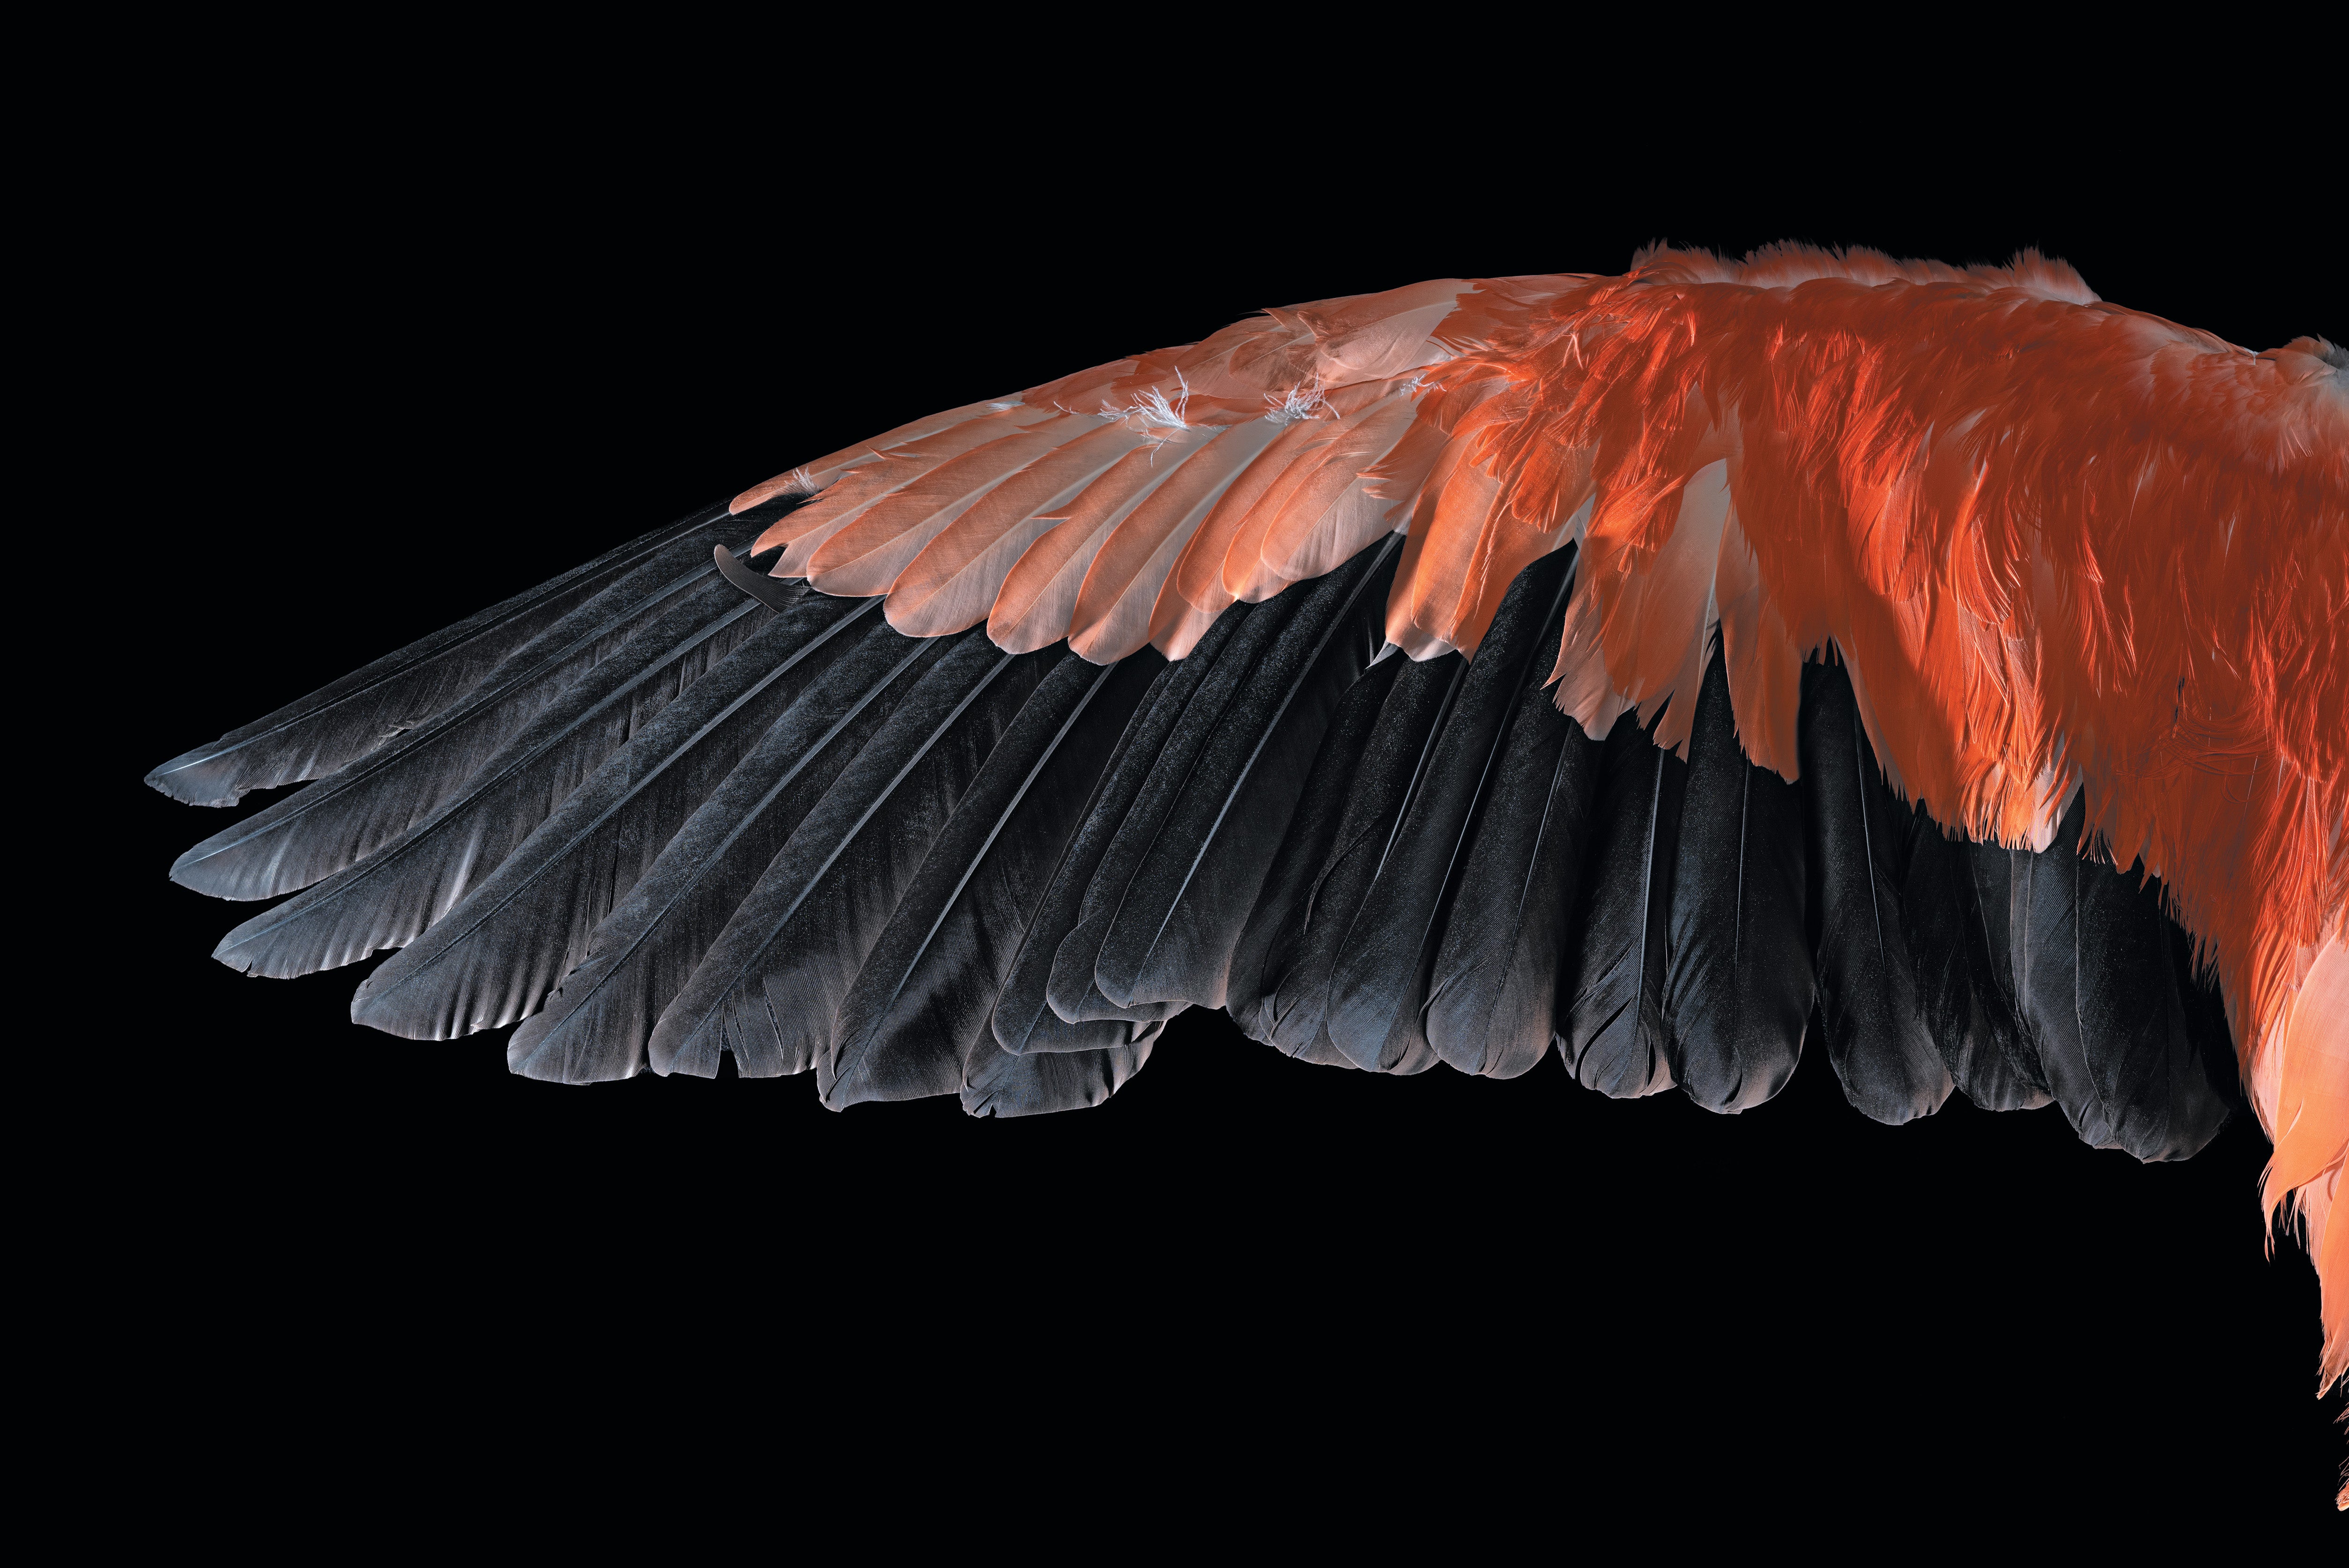 A pink, white and black feathered bird wing specimen shown on a black background.